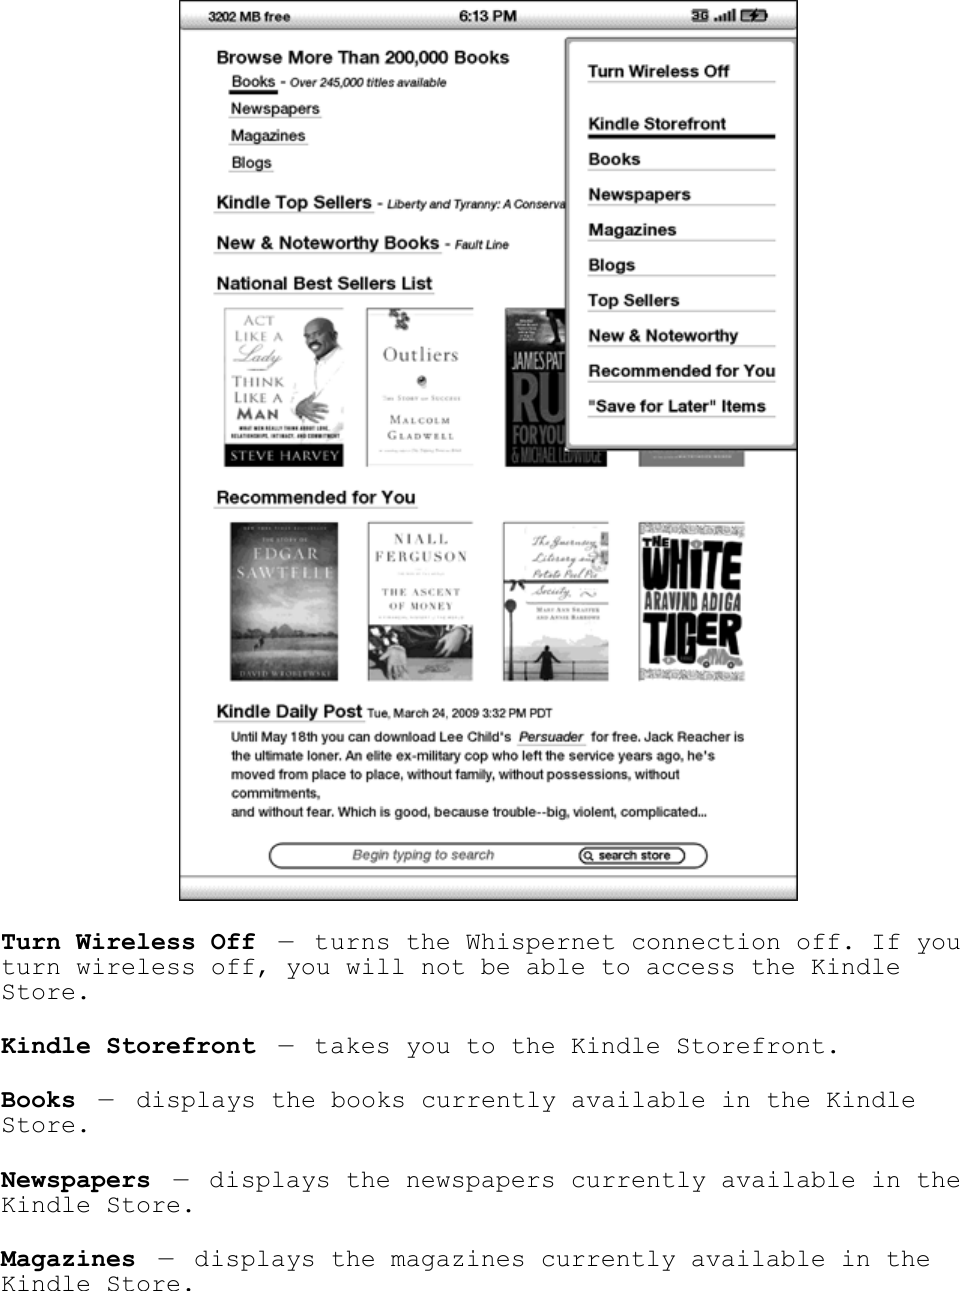    Turn Wireless Off — turns the Whispernet connection off. If you turn wireless off, you will not be able to access the Kindle Store. Kindle Storefront — takes you to the Kindle Storefront. Books — displays the books currently available in the Kindle Store. Newspapers — displays the newspapers currently available in the Kindle Store. Magazines — displays the magazines currently available in the Kindle Store. 